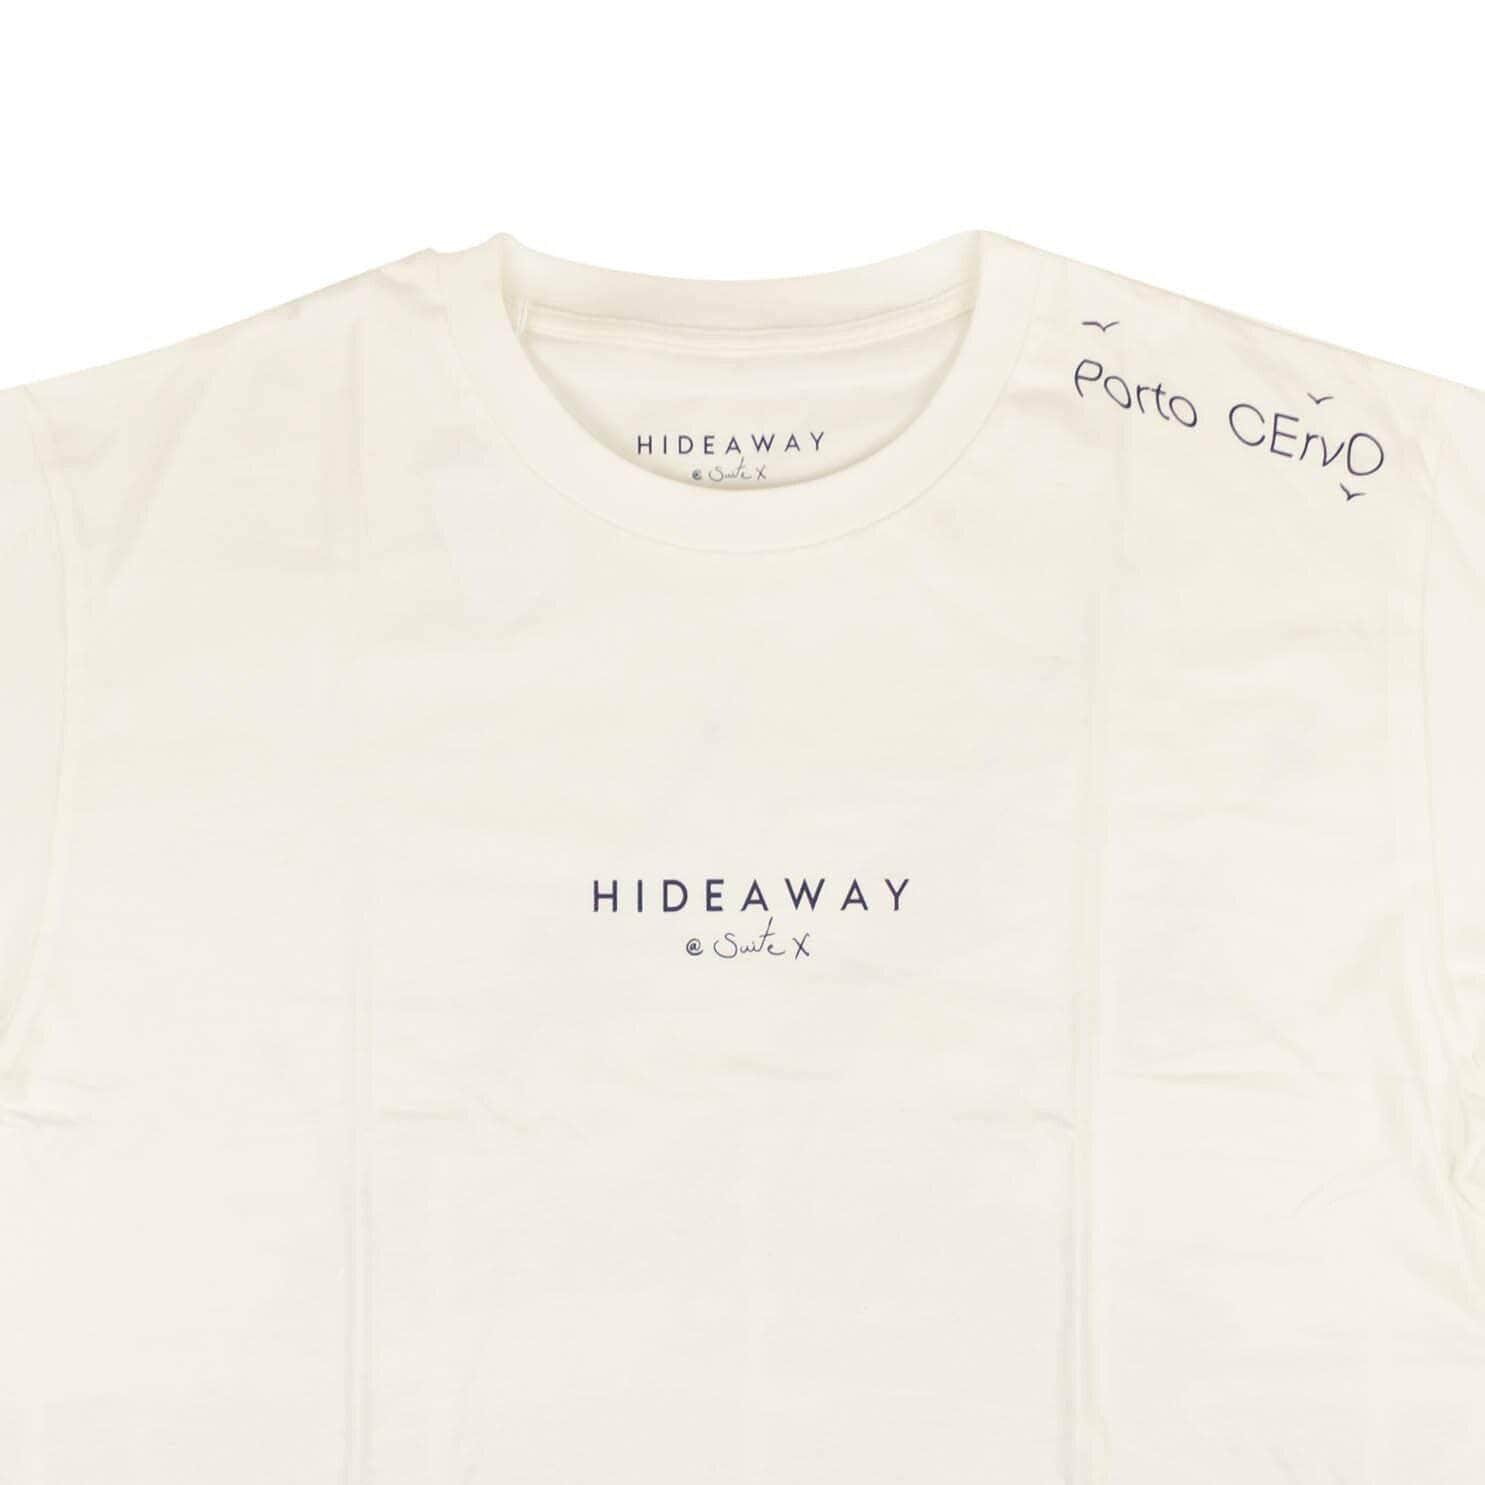 HIDEAWAY channelenable-all, chicmi, couponcollection, gender-mens, main-clothing, shop375 White Porto Cervo Logo Short Sleeve T-Shirt